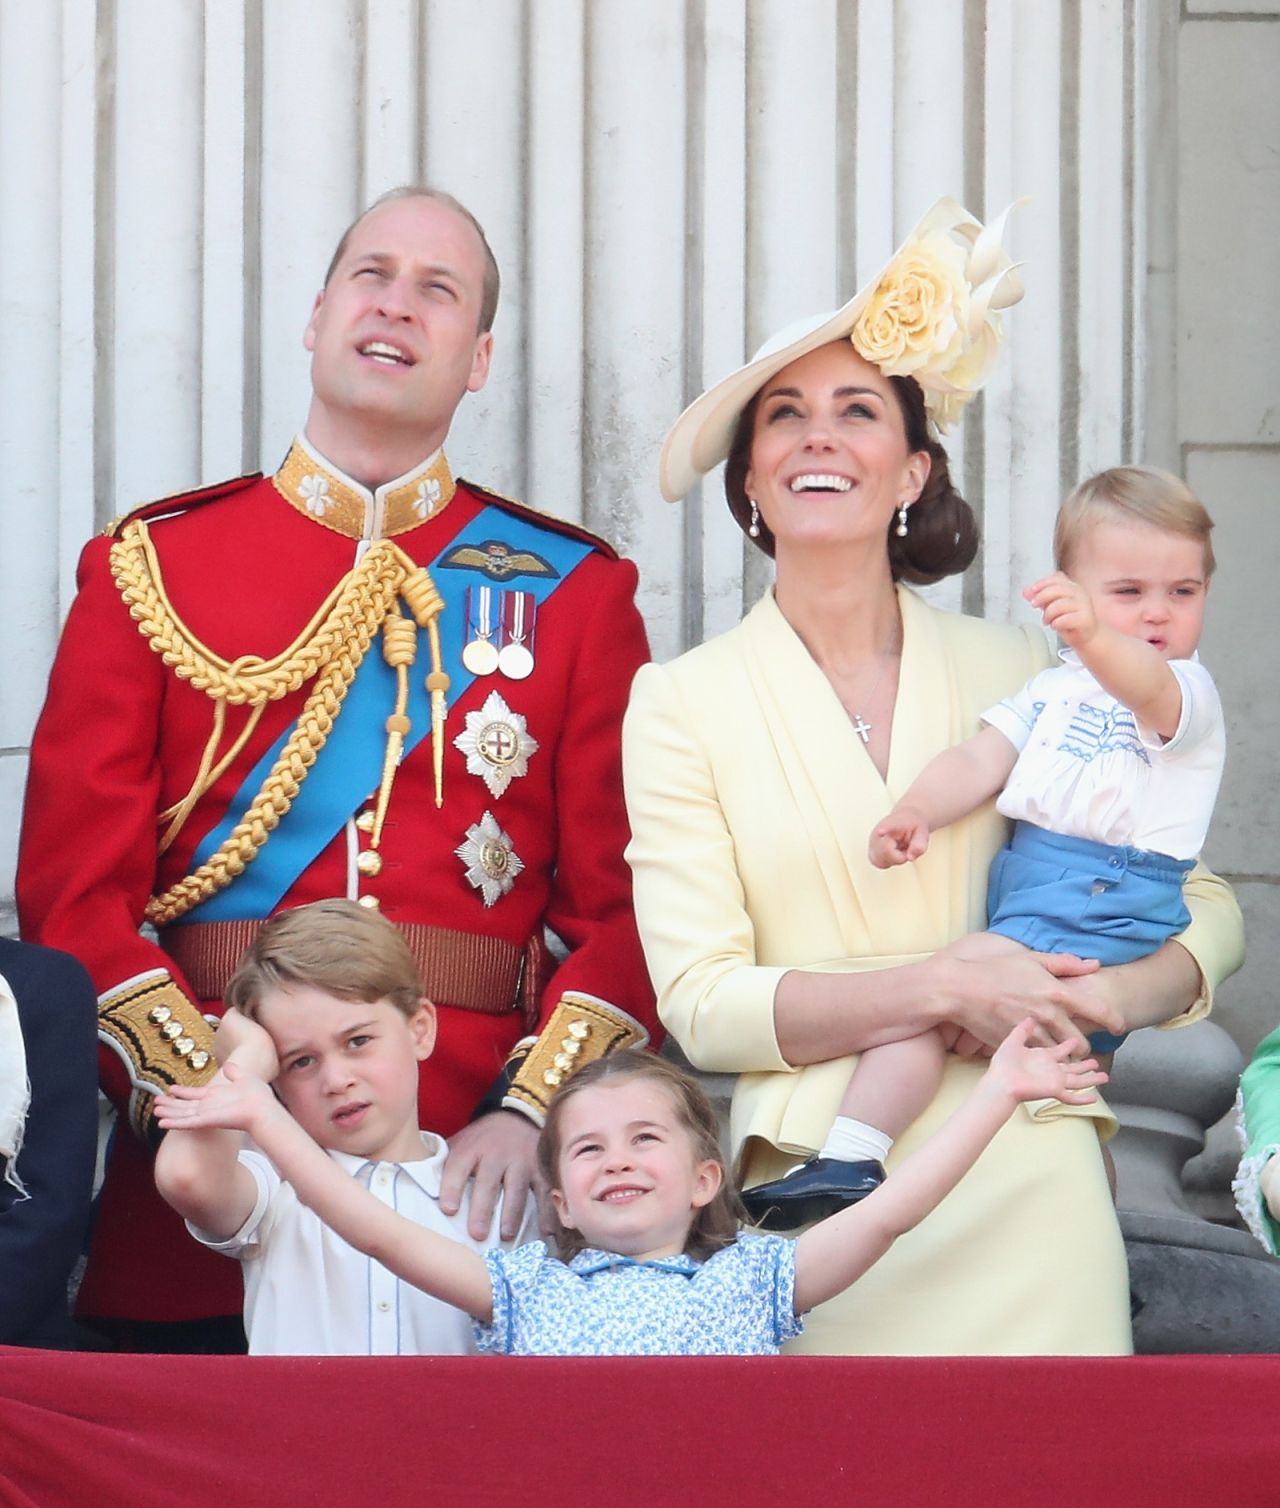 The family is photographed during Trooping the Colour, the Queen's annual birthday parade, on June 8, 2019, in London.